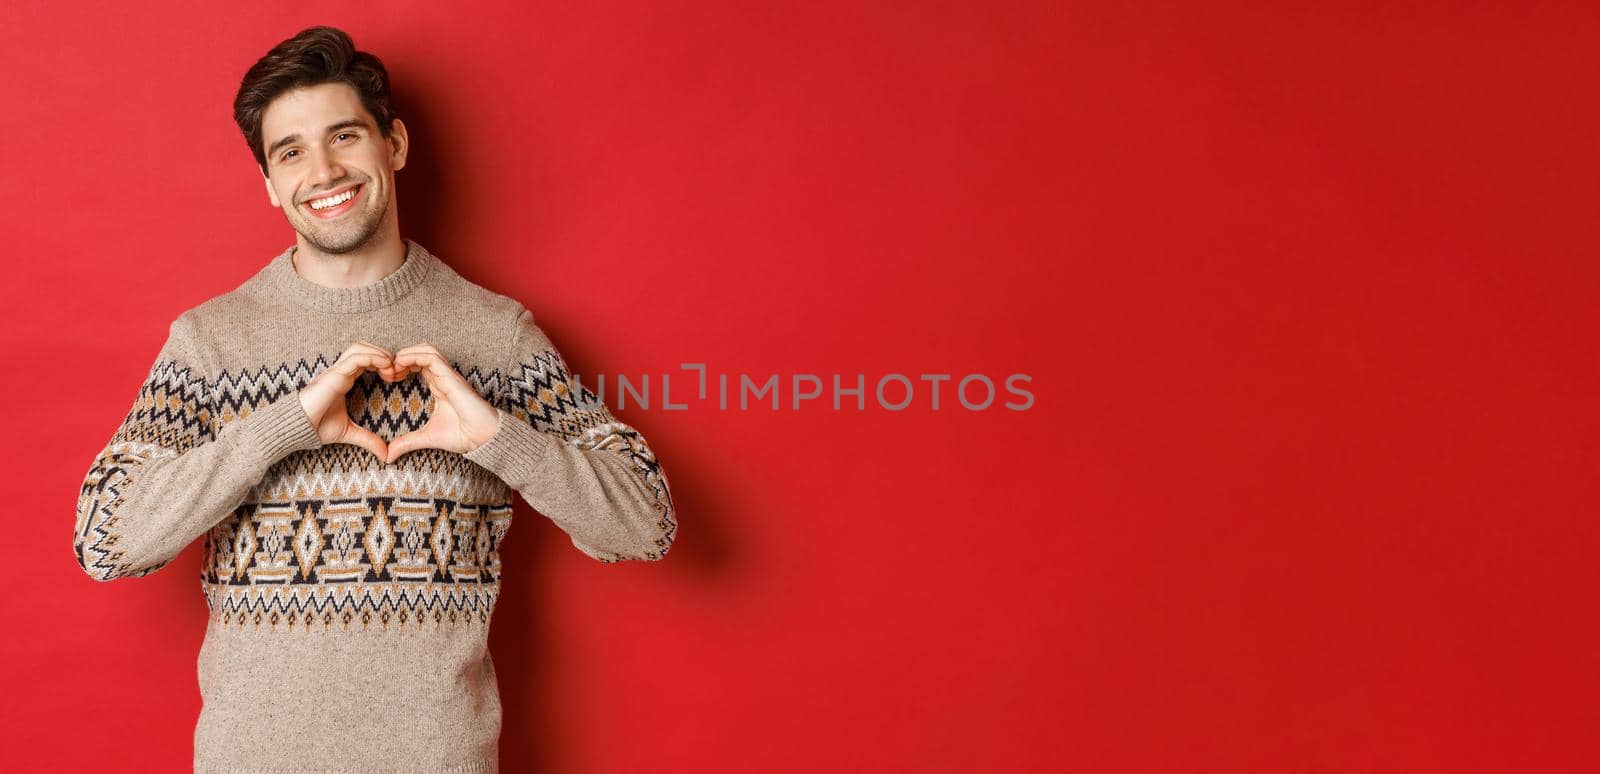 Image of handsome bearded guy in winter sweater, wishing merry christmas and showing heart sign, smiling lovely at camera, standing against red background.